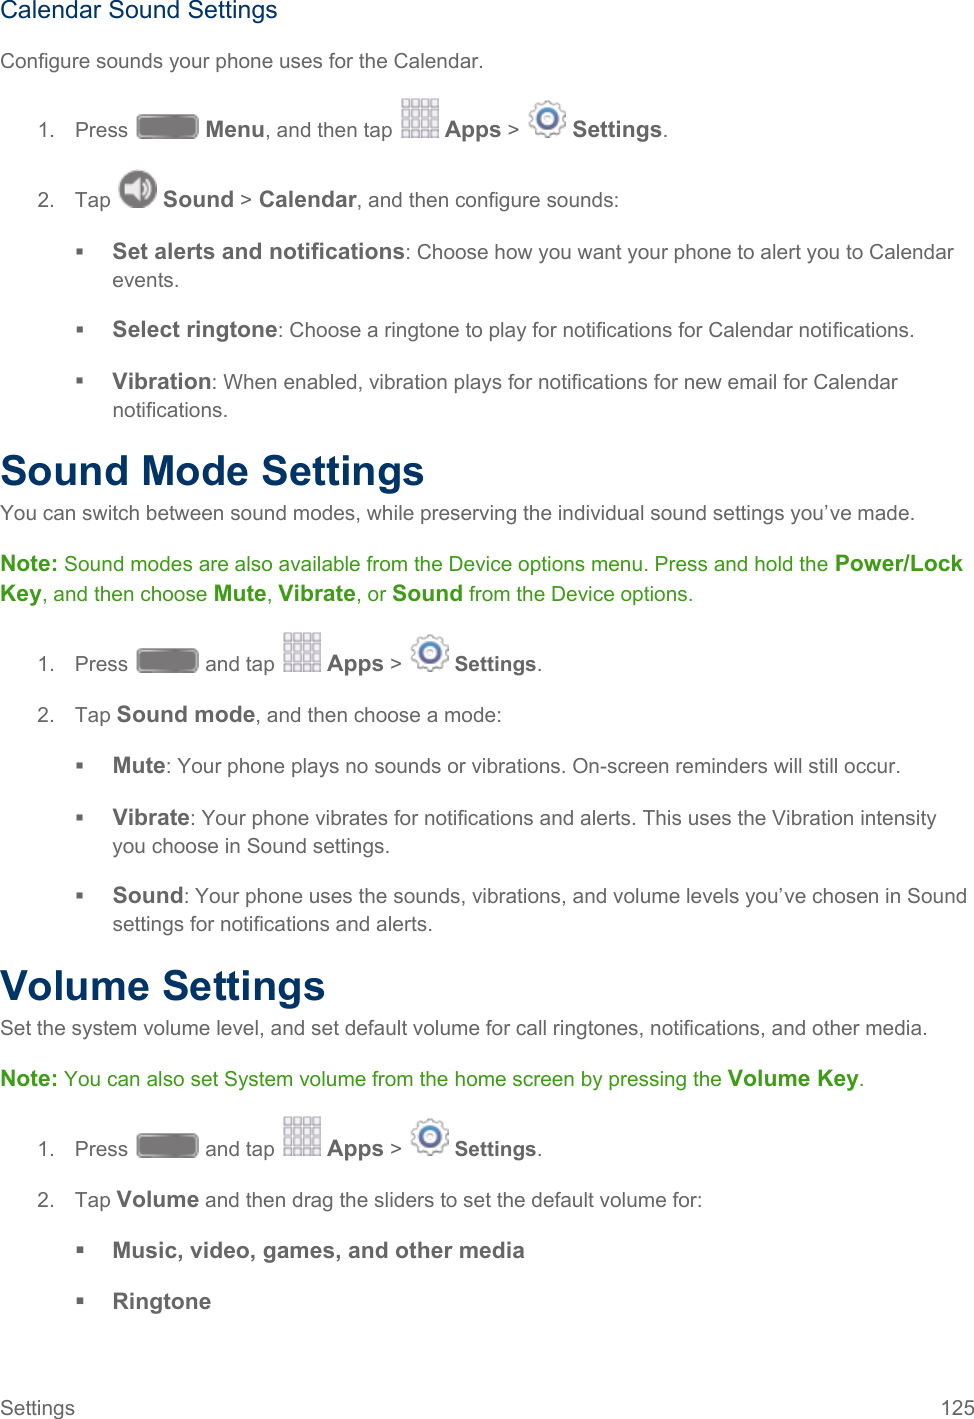  Calendar Sound Settings Configure sounds your phone uses for the Calendar. 1. Press   Menu, and then tap   Apps &gt;   Settings.  2. Tap   Sound &gt; Calendar, and then configure sounds:  Set alerts and notifications: Choose how you want your phone to alert you to Calendar events.  Select ringtone: Choose a ringtone to play for notifications for Calendar notifications.  Vibration: When enabled, vibration plays for notifications for new email for Calendar notifications. Sound Mode Settings You can switch between sound modes, while preserving the individual sound settings you’ve made. Note: Sound modes are also available from the Device options menu. Press and hold the Power/Lock Key, and then choose Mute, Vibrate, or Sound from the Device options. 1. Press   and tap   Apps &gt;   Settings.  2. Tap Sound mode, and then choose a mode:  Mute: Your phone plays no sounds or vibrations. On-screen reminders will still occur.  Vibrate: Your phone vibrates for notifications and alerts. This uses the Vibration intensity you choose in Sound settings.  Sound: Your phone uses the sounds, vibrations, and volume levels you’ve chosen in Sound settings for notifications and alerts. Volume Settings Set the system volume level, and set default volume for call ringtones, notifications, and other media. Note: You can also set System volume from the home screen by pressing the Volume Key. 1. Press   and tap   Apps &gt;   Settings.  2. Tap Volume and then drag the sliders to set the default volume for:  Music, video, games, and other media  Ringtone Settings 125   